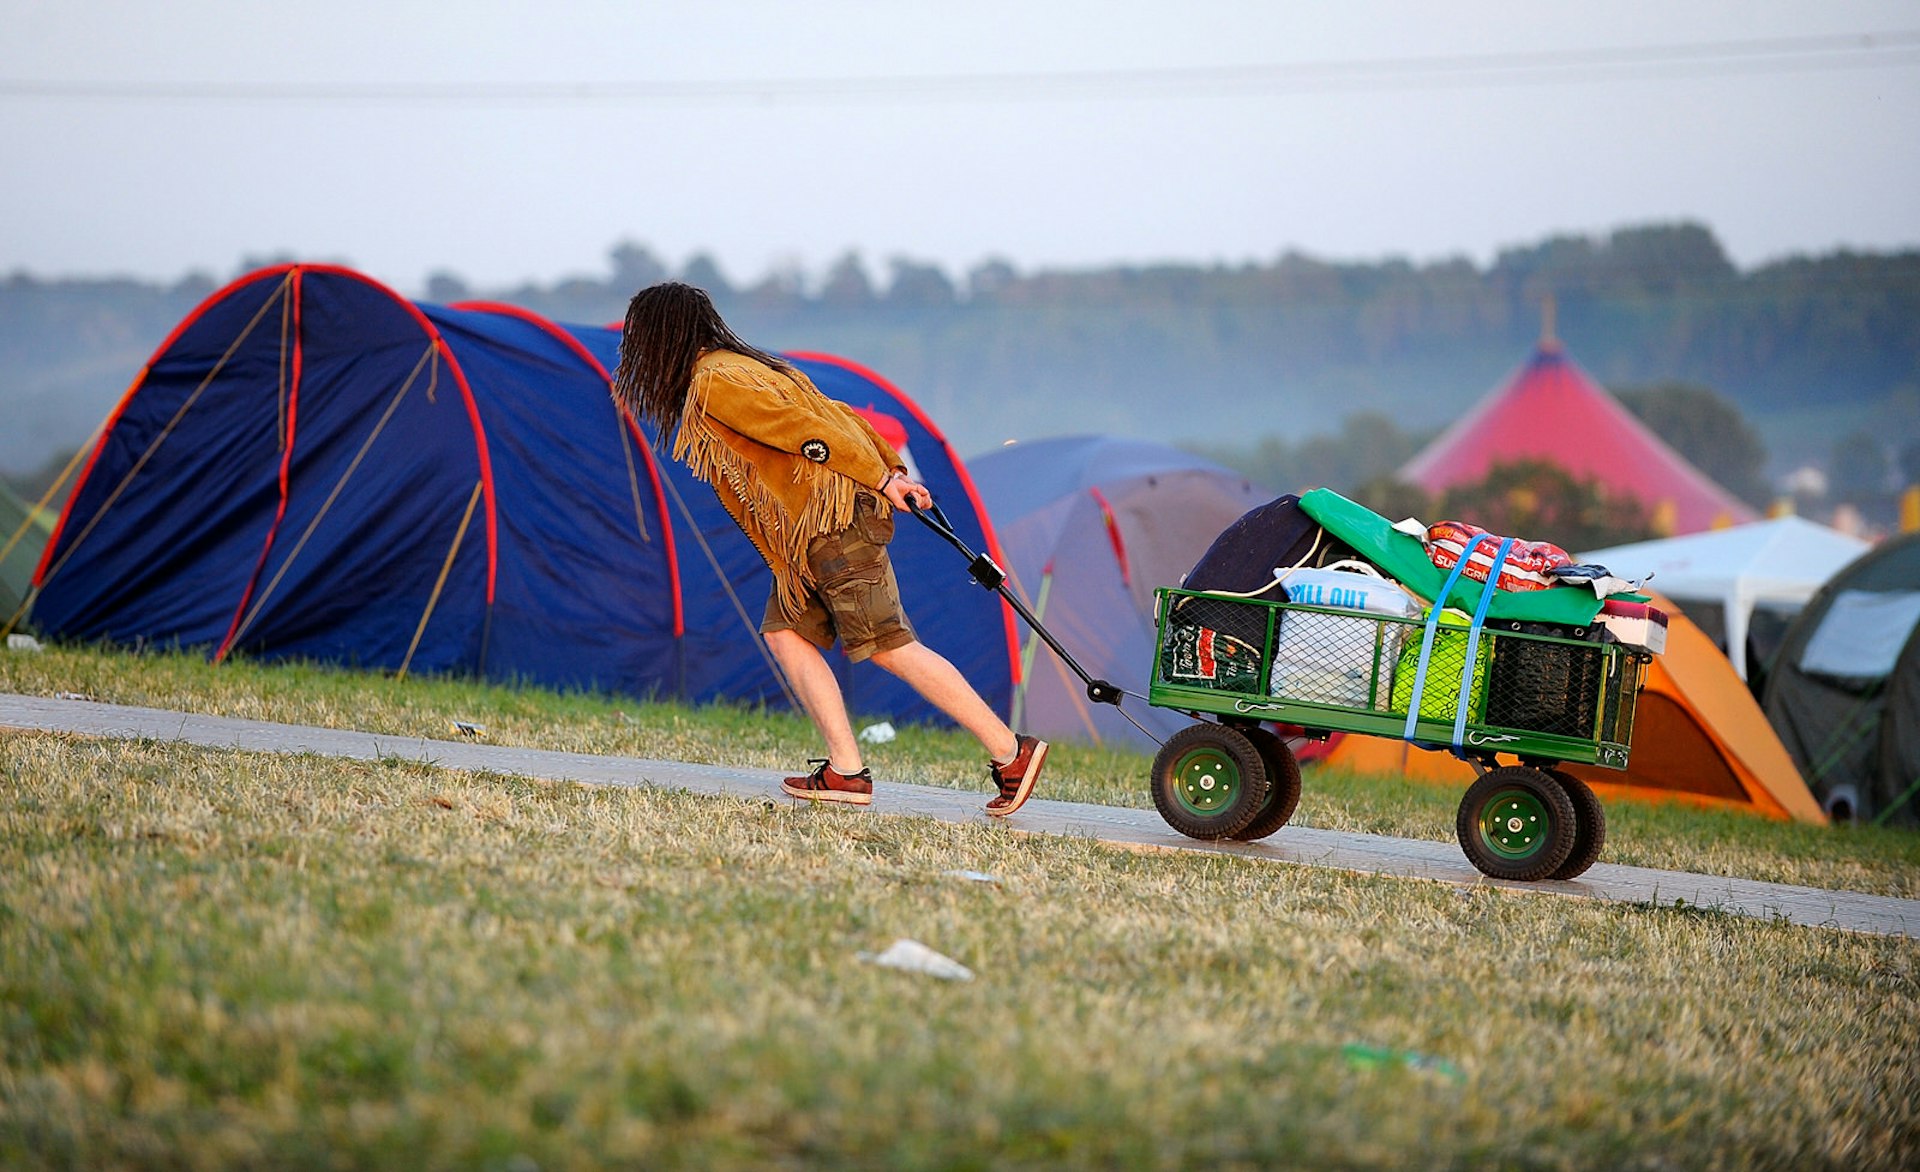 Glastonbury guide - With fully loaded backpacks and camping stuff revellers arrive at Worthy Farm on June 23, 2010 in Glastonbury, England. A person wearing a brown suede jacket who's long hair is hiding there face lugs a loaded trailer uphill towards the campsite. 